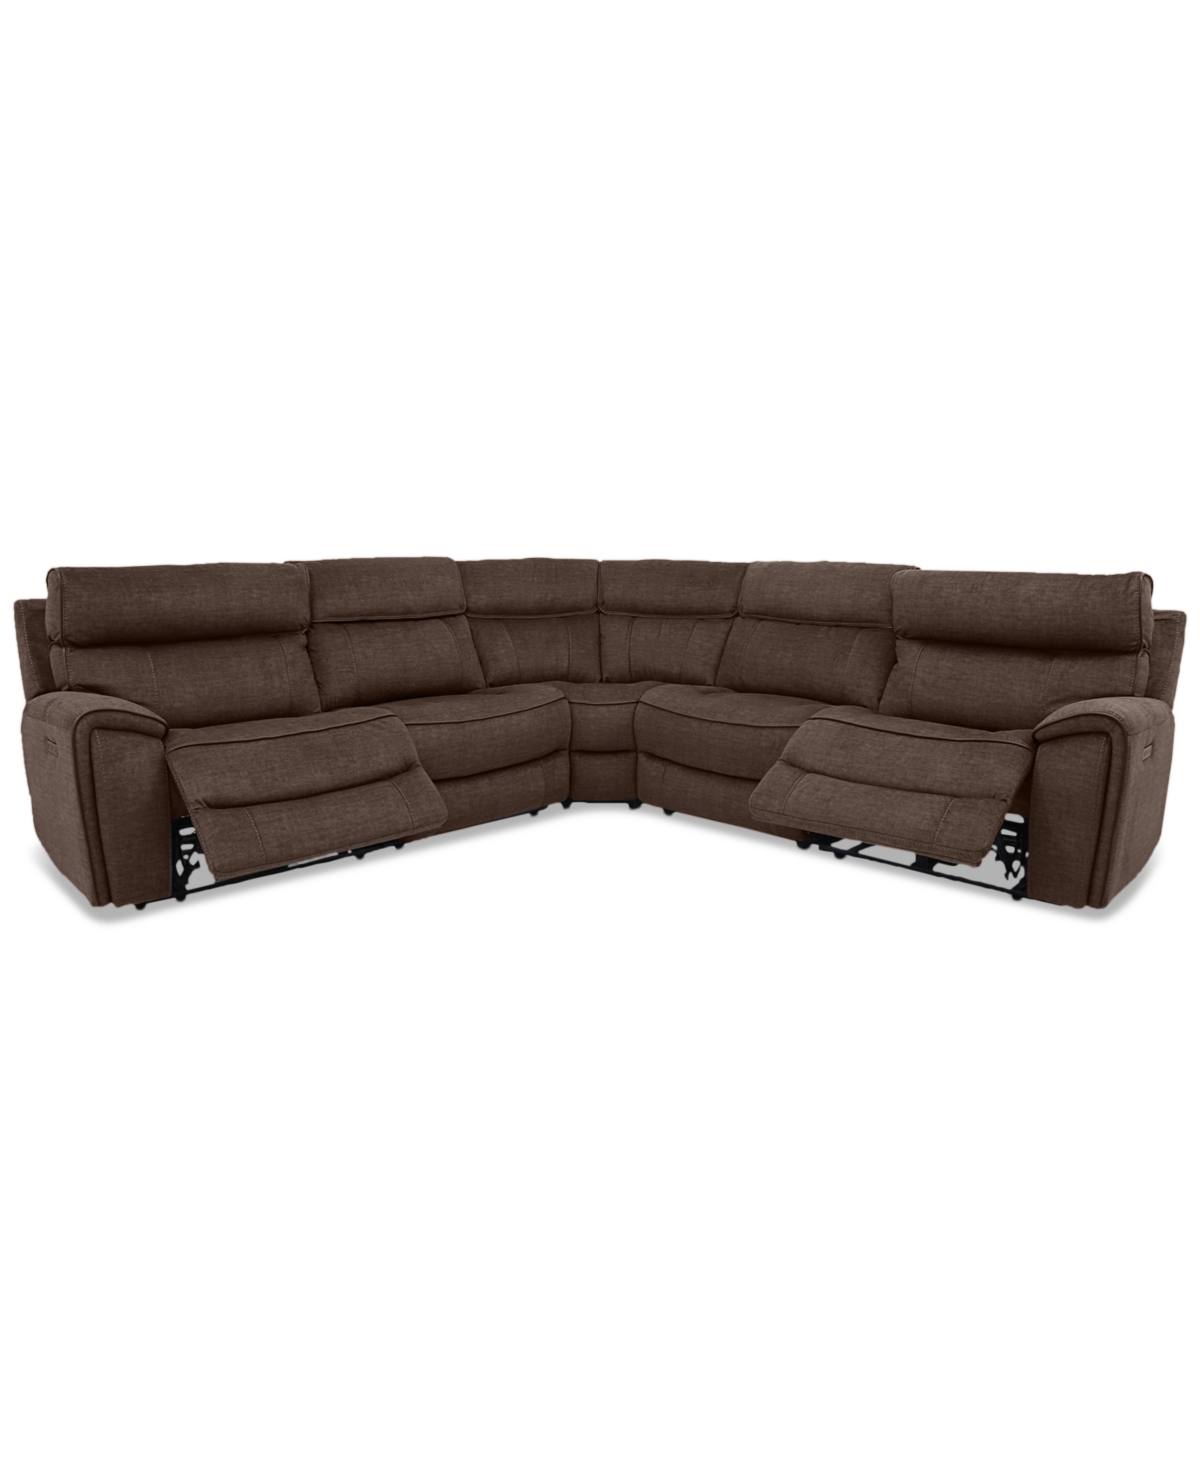 Furniture Hutchenson 5-pc. Fabric Sectional With 2 Power Recliners And Power Headrests In Chocolate Brown